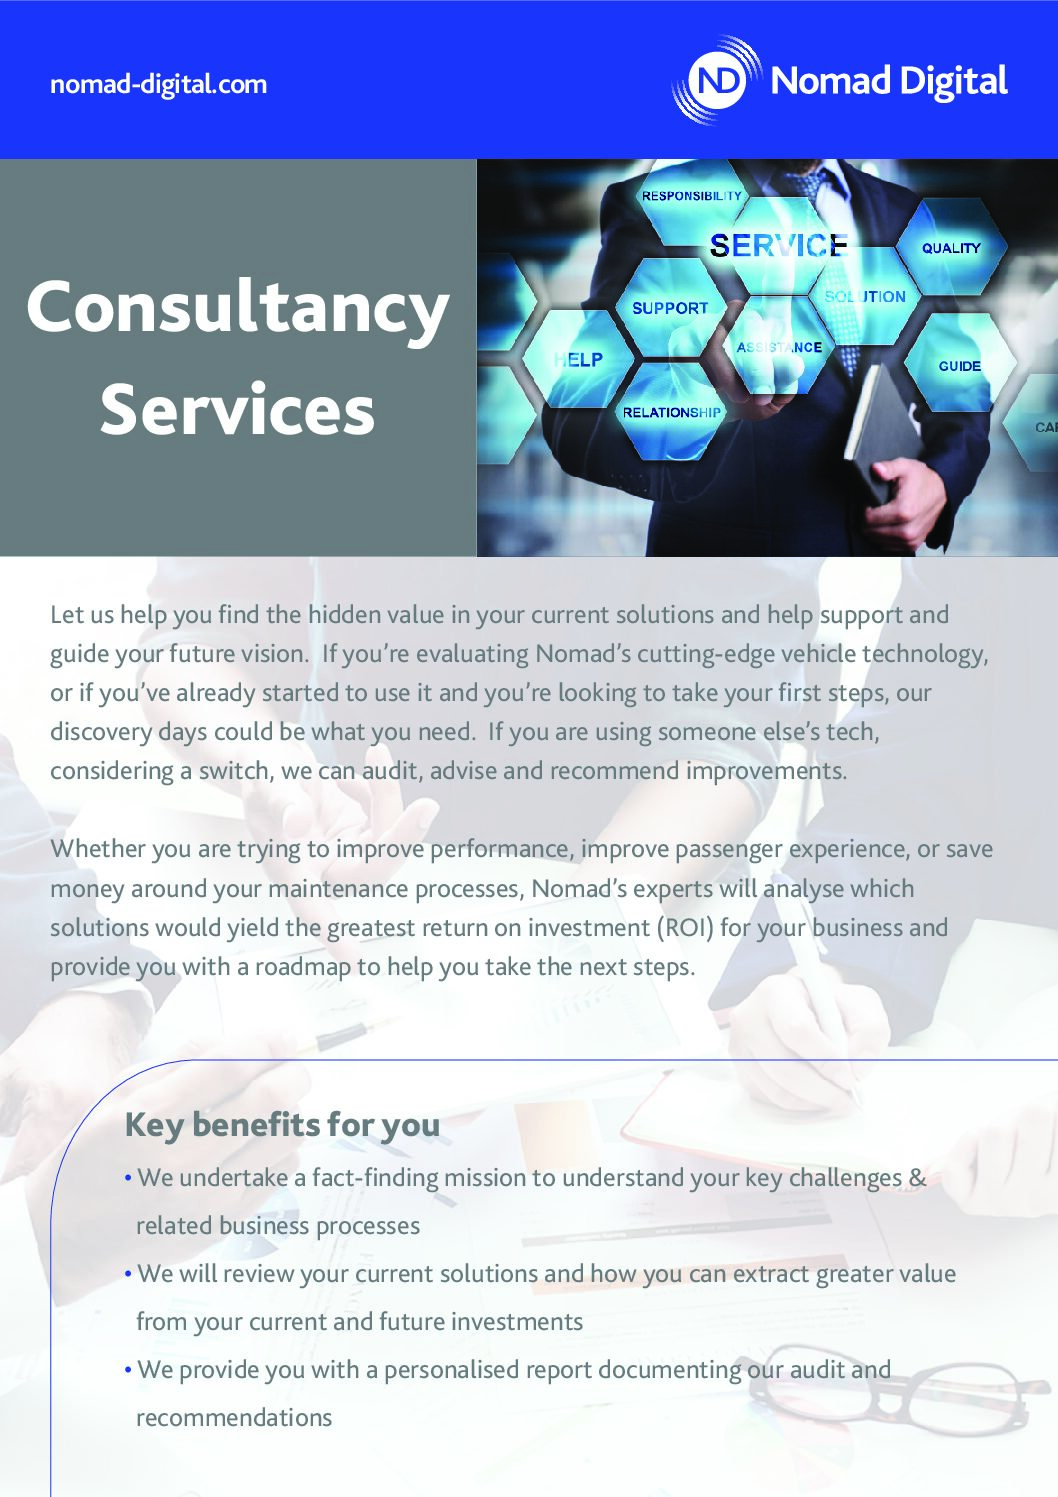 Expert Advice and Consultancy Services